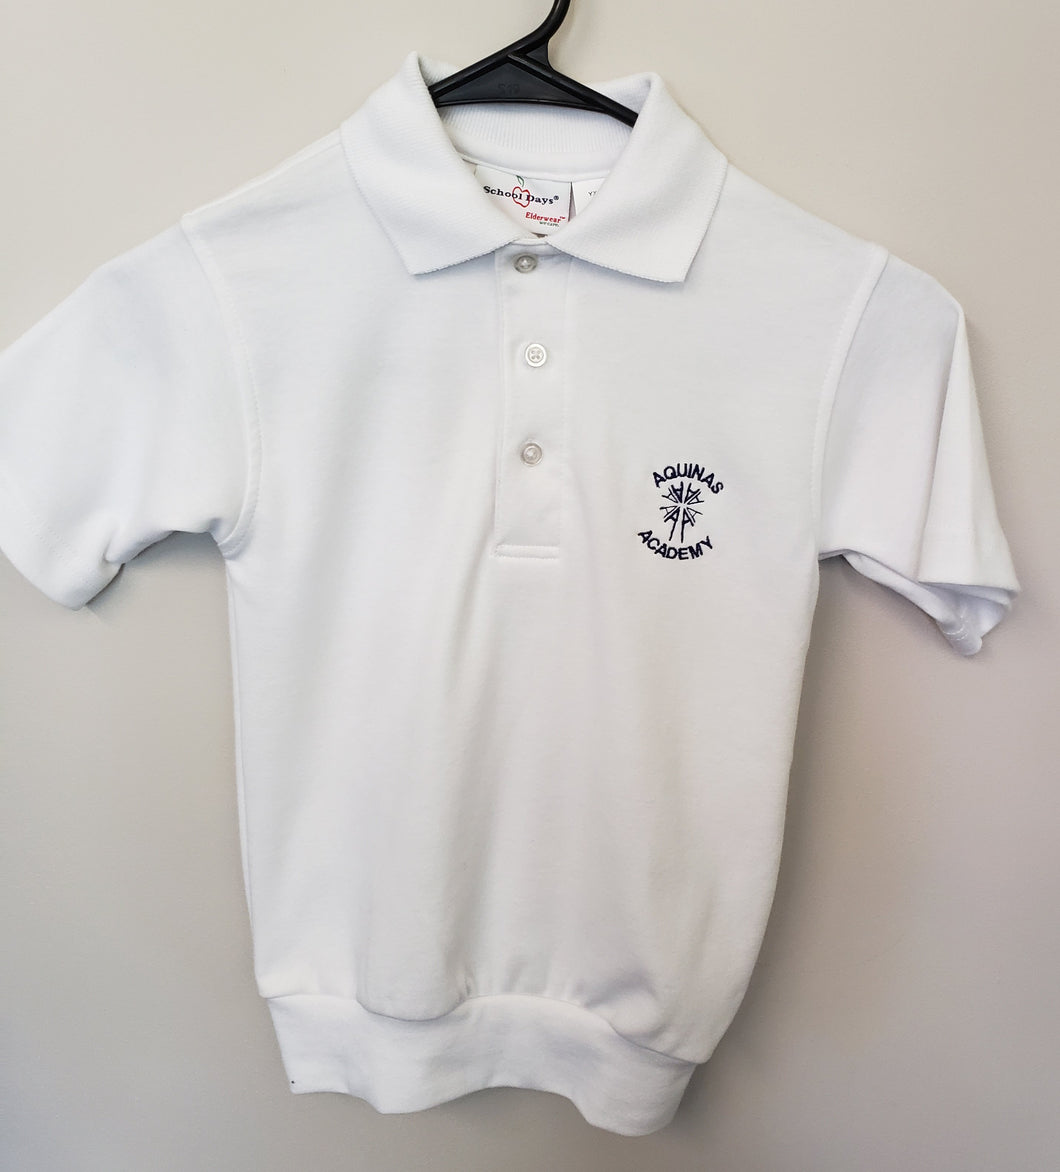 AA011 Aquinas Academy - Short Sleeve Banded Jersey Polo - White Only - Youth Sizes